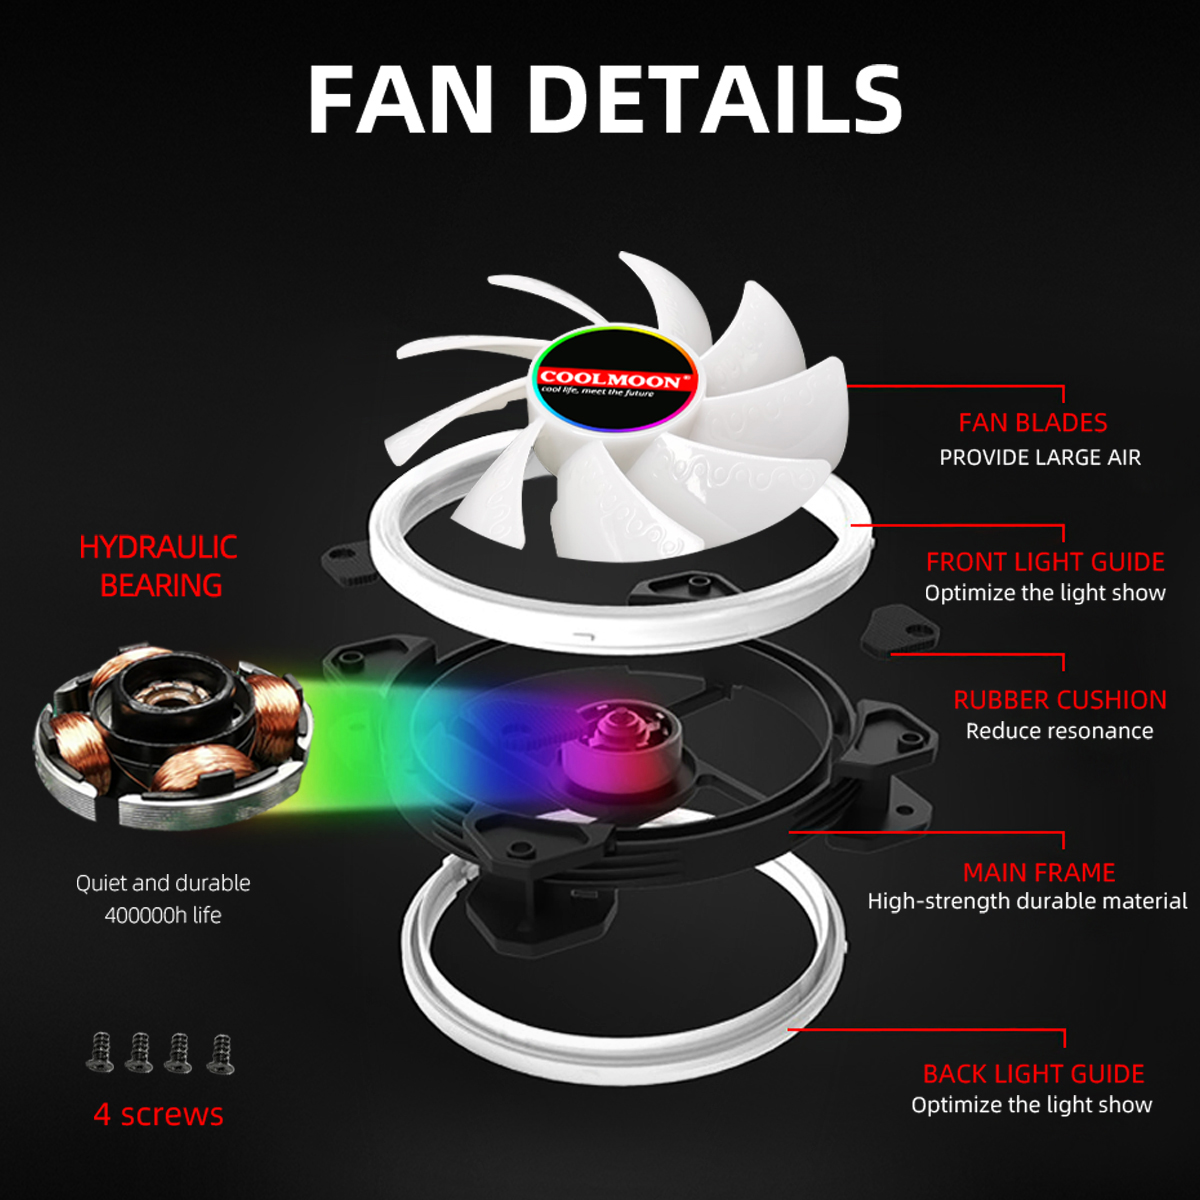 120mm-Computer-PC-Cooler-Cooling-Fan-RGB-LED-Multicolor-mode-Quiet-Chassis-Fan-With-Controller-1940489-10